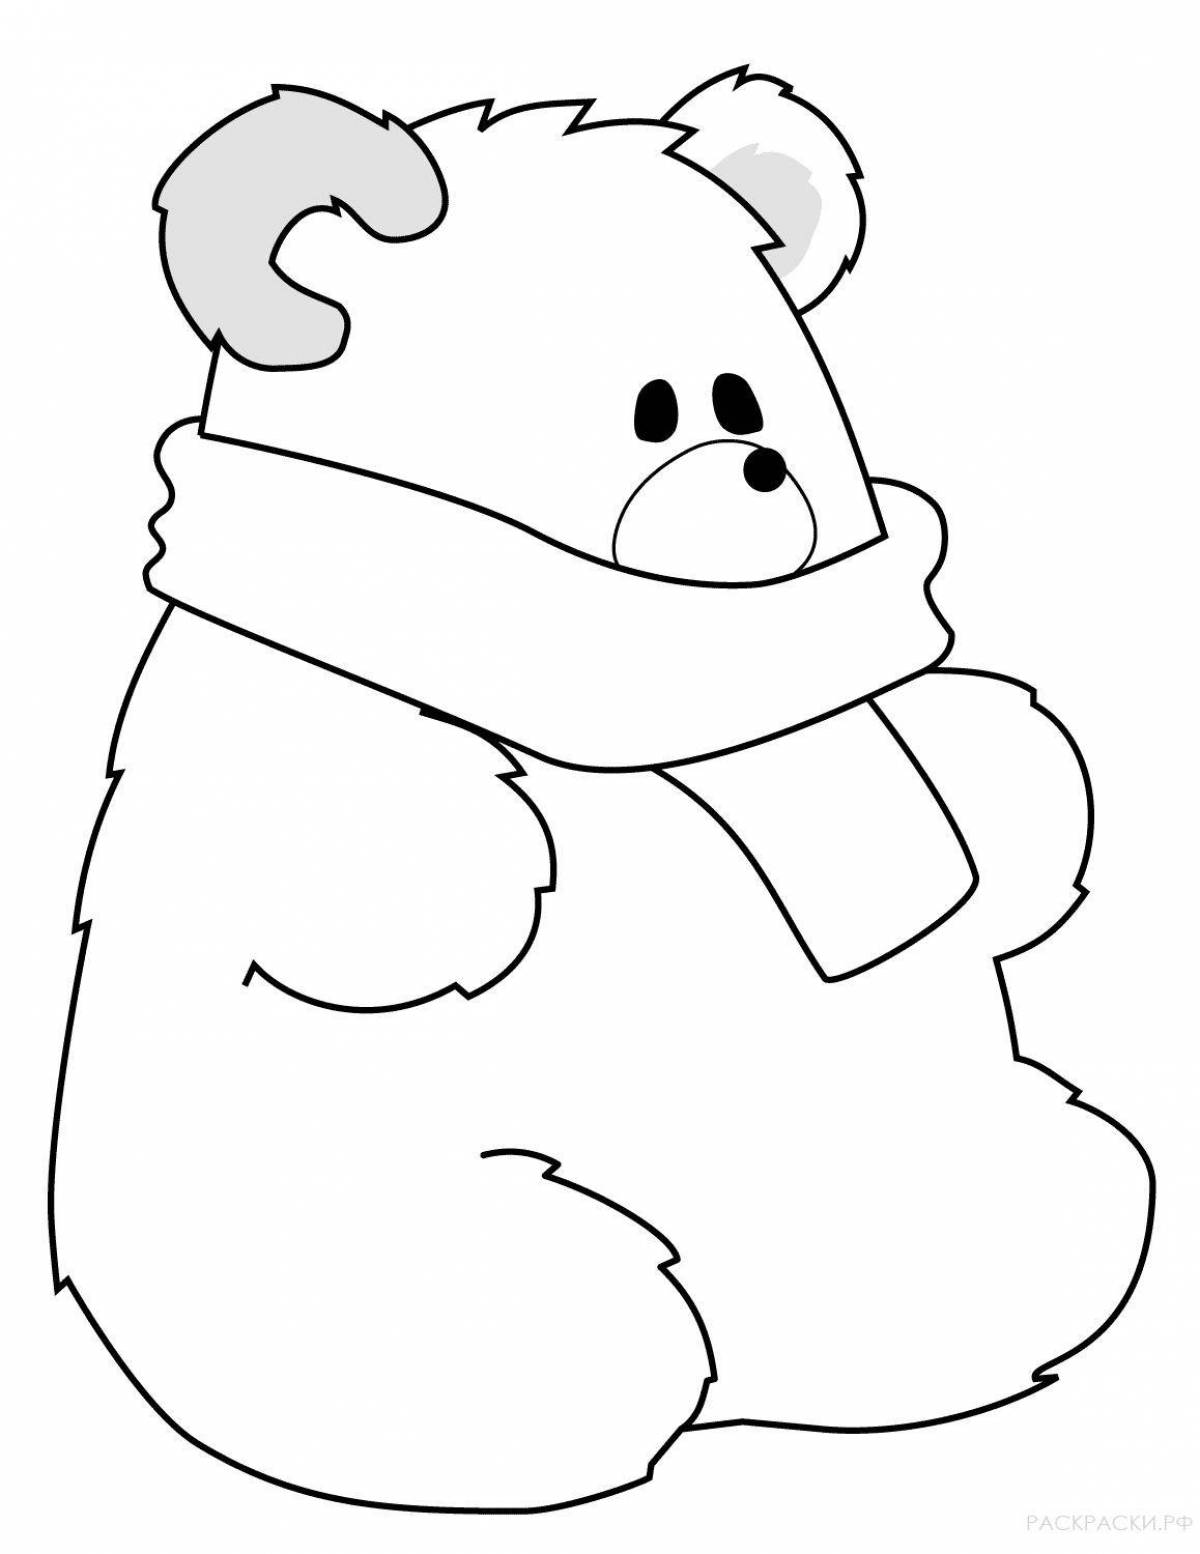 Sparkling Christmas bear coloring page